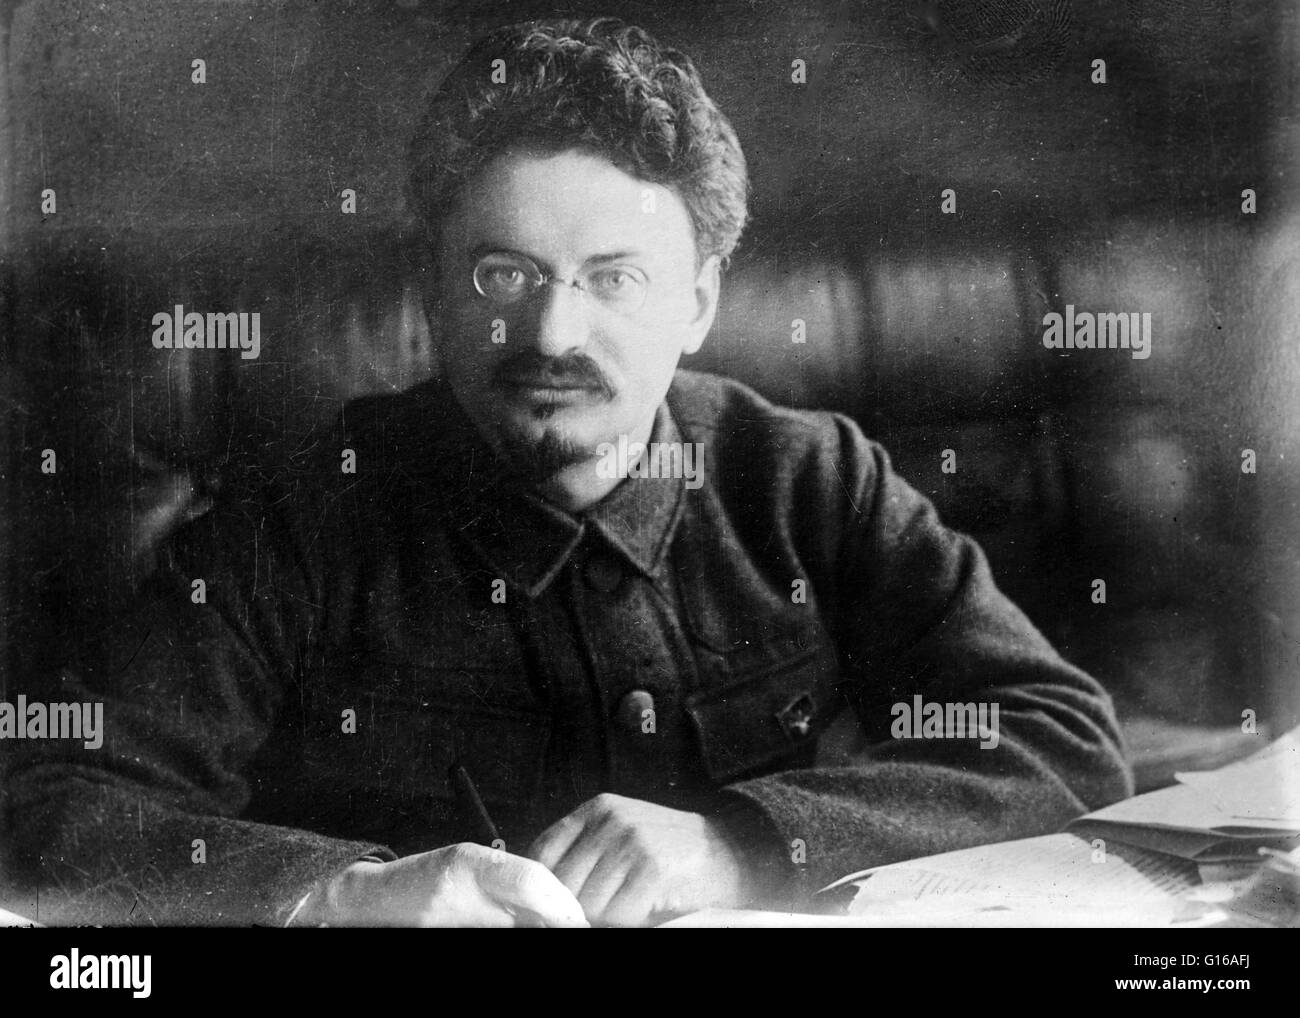 Bain News Service photograph of Trotsky. No date recorded on caption card. Leon Trotsky (November 7, 1879 - August 21, 1940) was a Russian Marxist revolutionary and theorist. He joined the Bolsheviks prior to the 1917 October Revolution and was a major fi Stock Photo